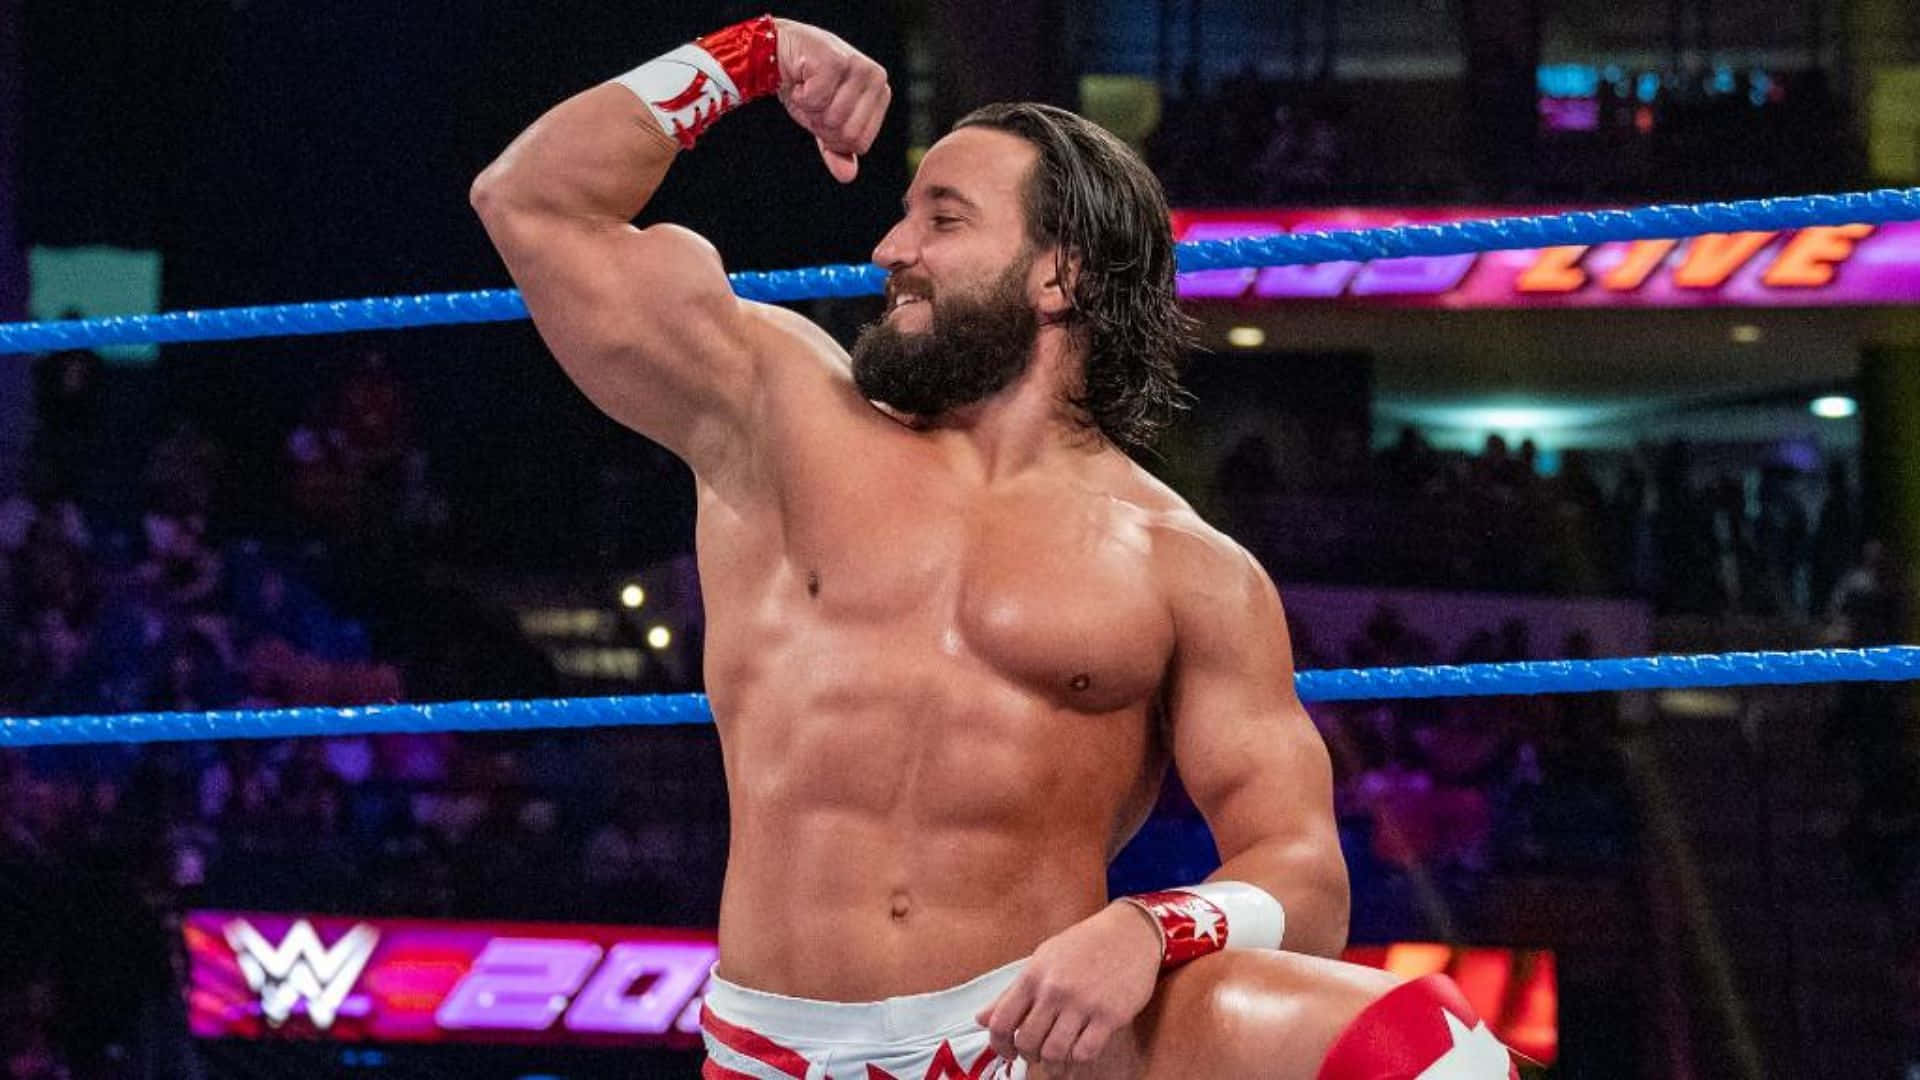 Tony Nese showing off his physique in the ring Wallpaper